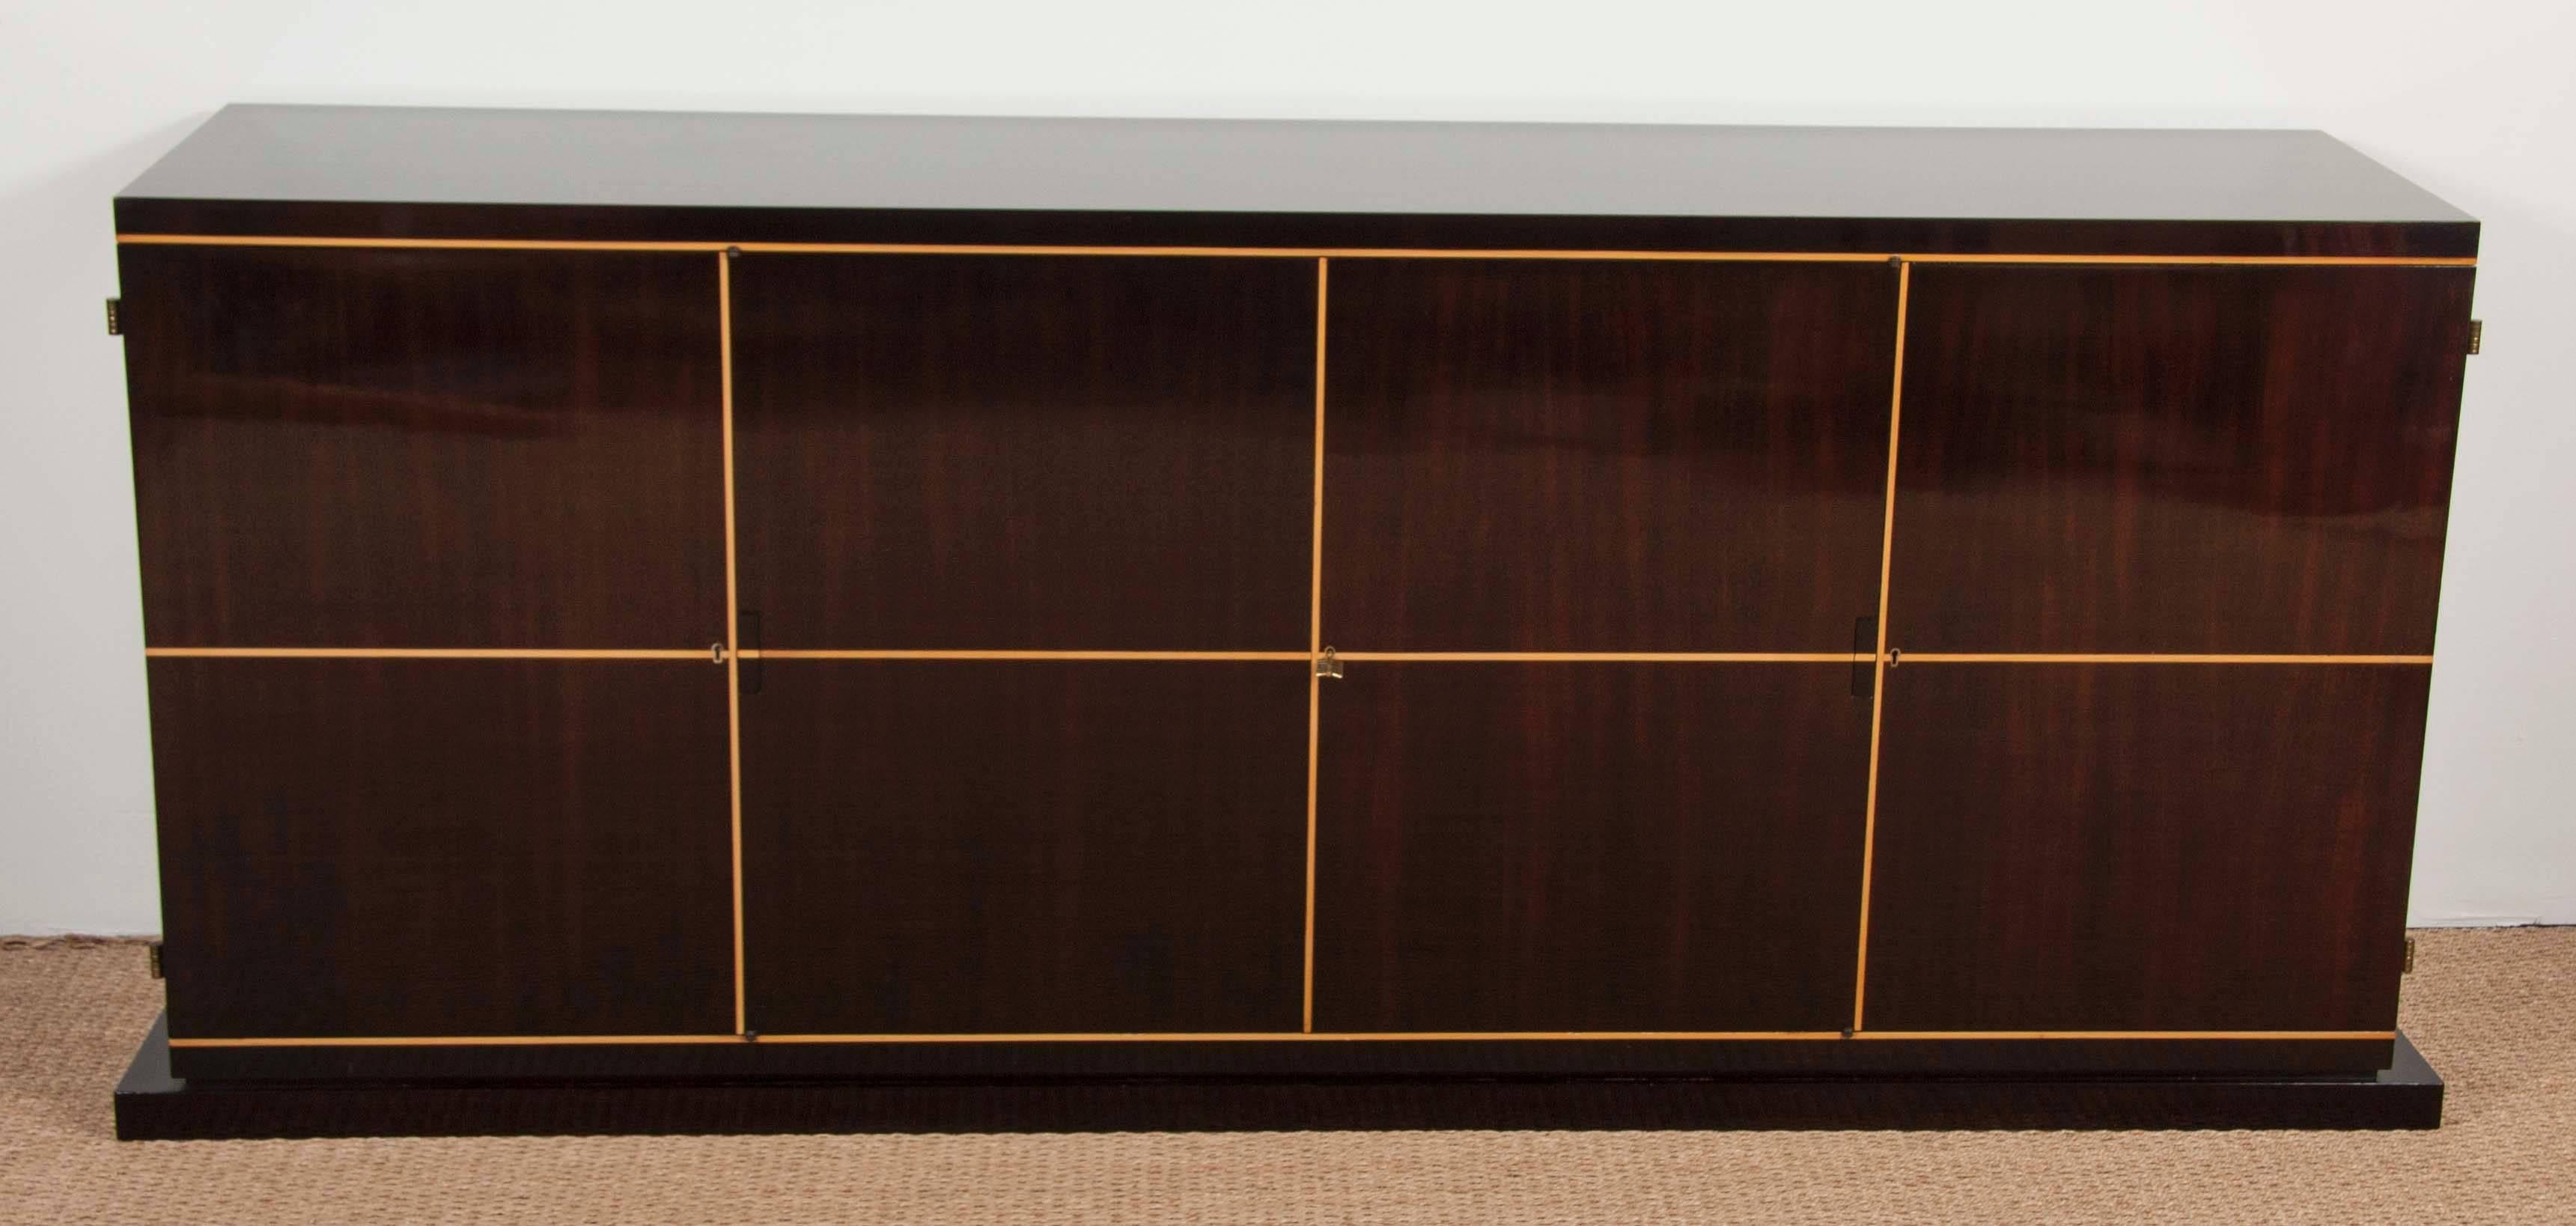 A lacquered mahogany brass banded sideboard with maple inlay by Tommi Parzinger. 

Branded: 